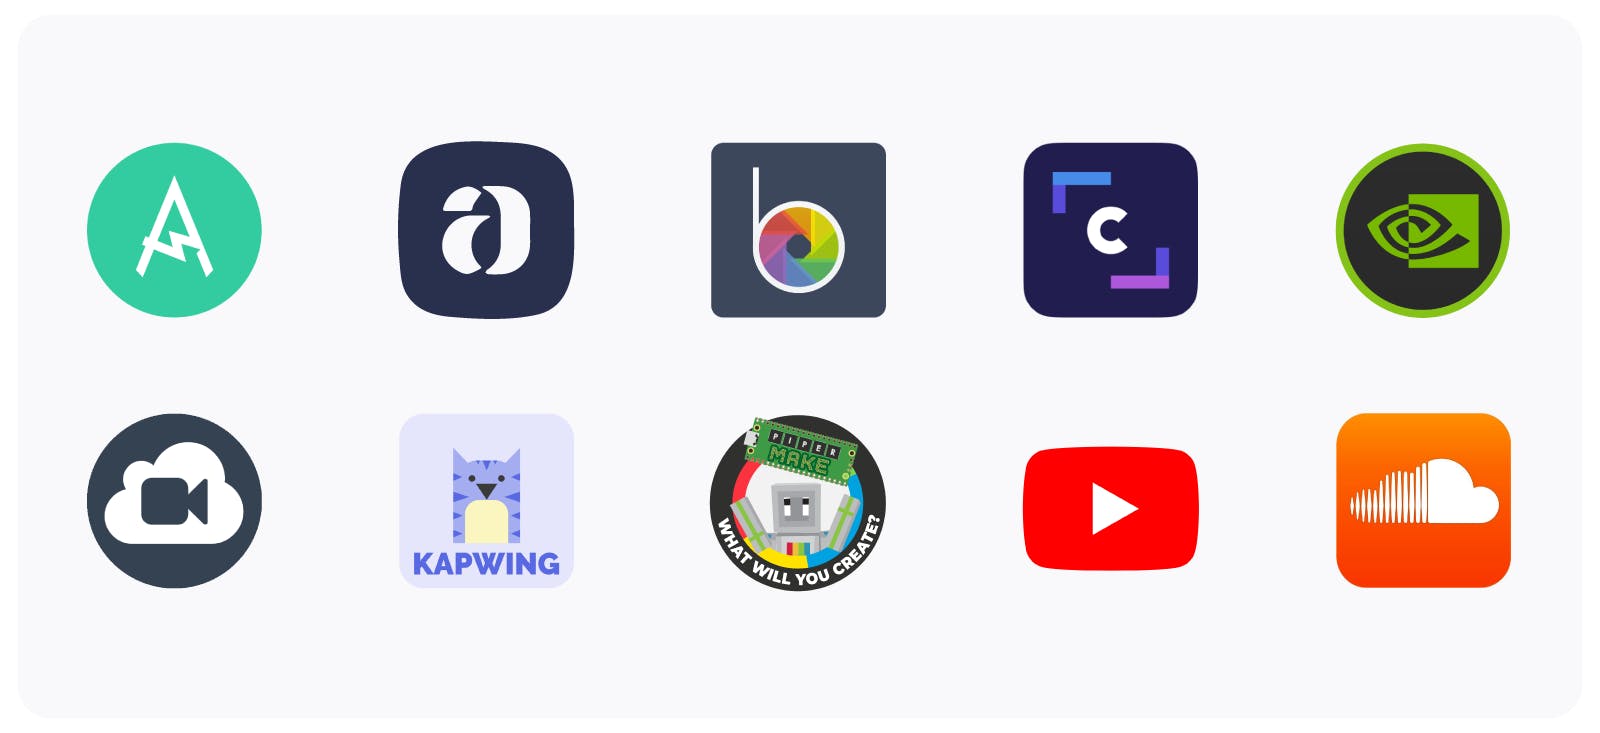 2 by 5 grid of logos, showing the BeFunky, Cloud Stop Motion, SoundCloud, Clipchamp, Amped Studio, Artboard Studio, Replit, Kapwing, and Piper Make logos